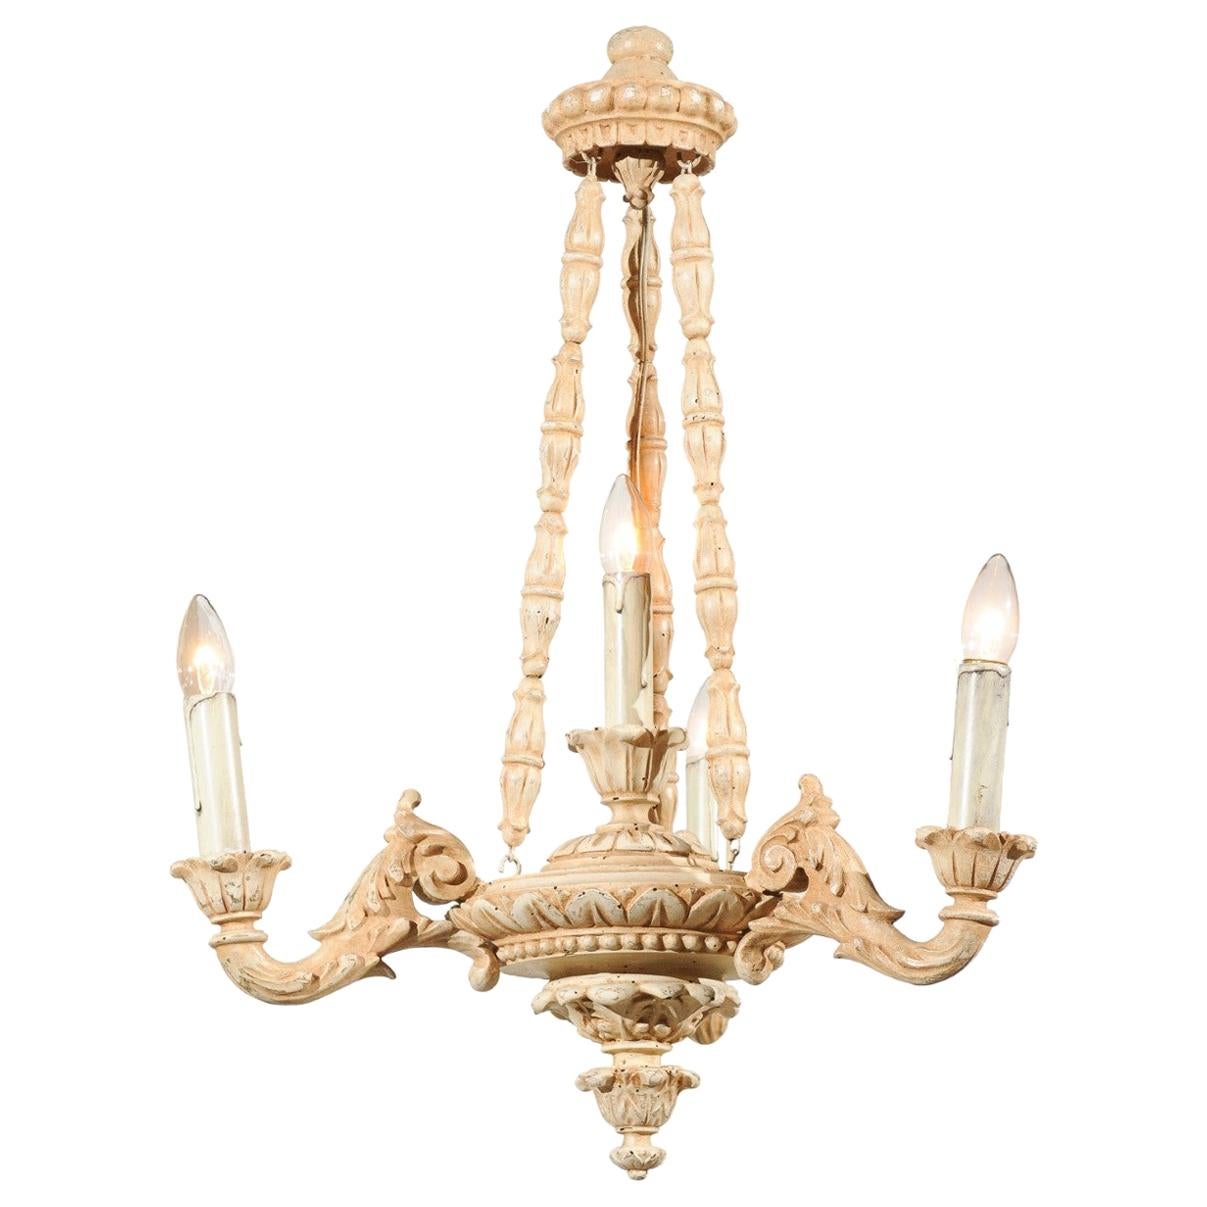 Italian 19th Century Carved Wooden Three-Light Chandelier with Scrolling Arms